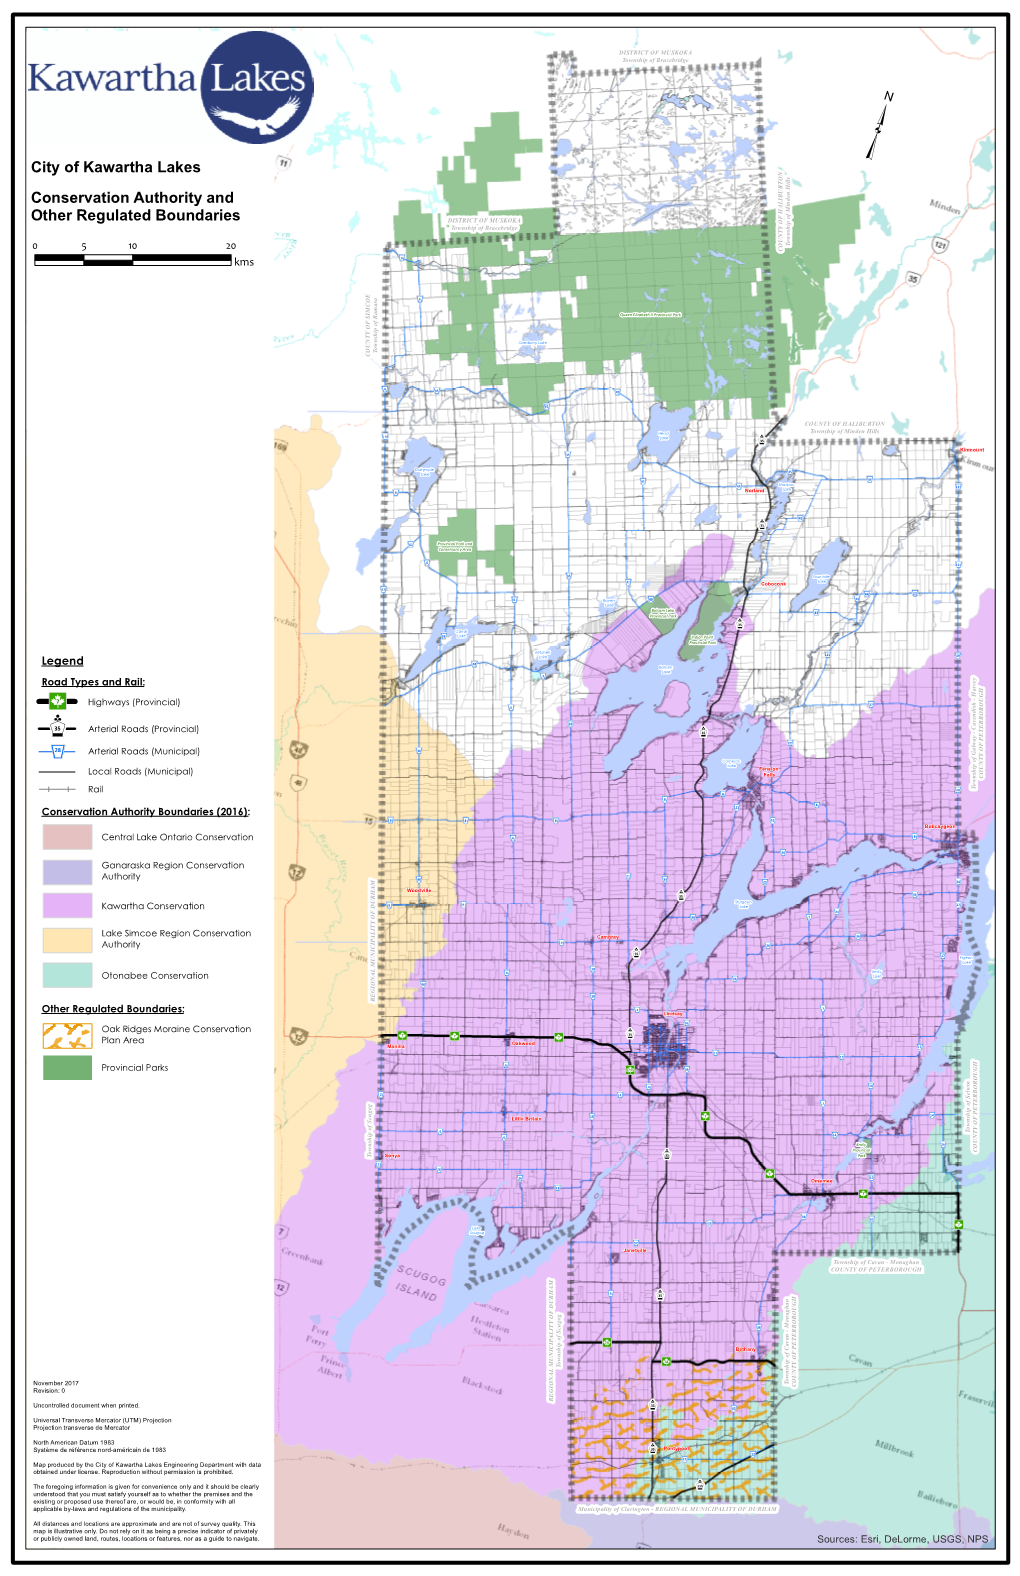 Conservation Authority and Other Regulated Boundaries